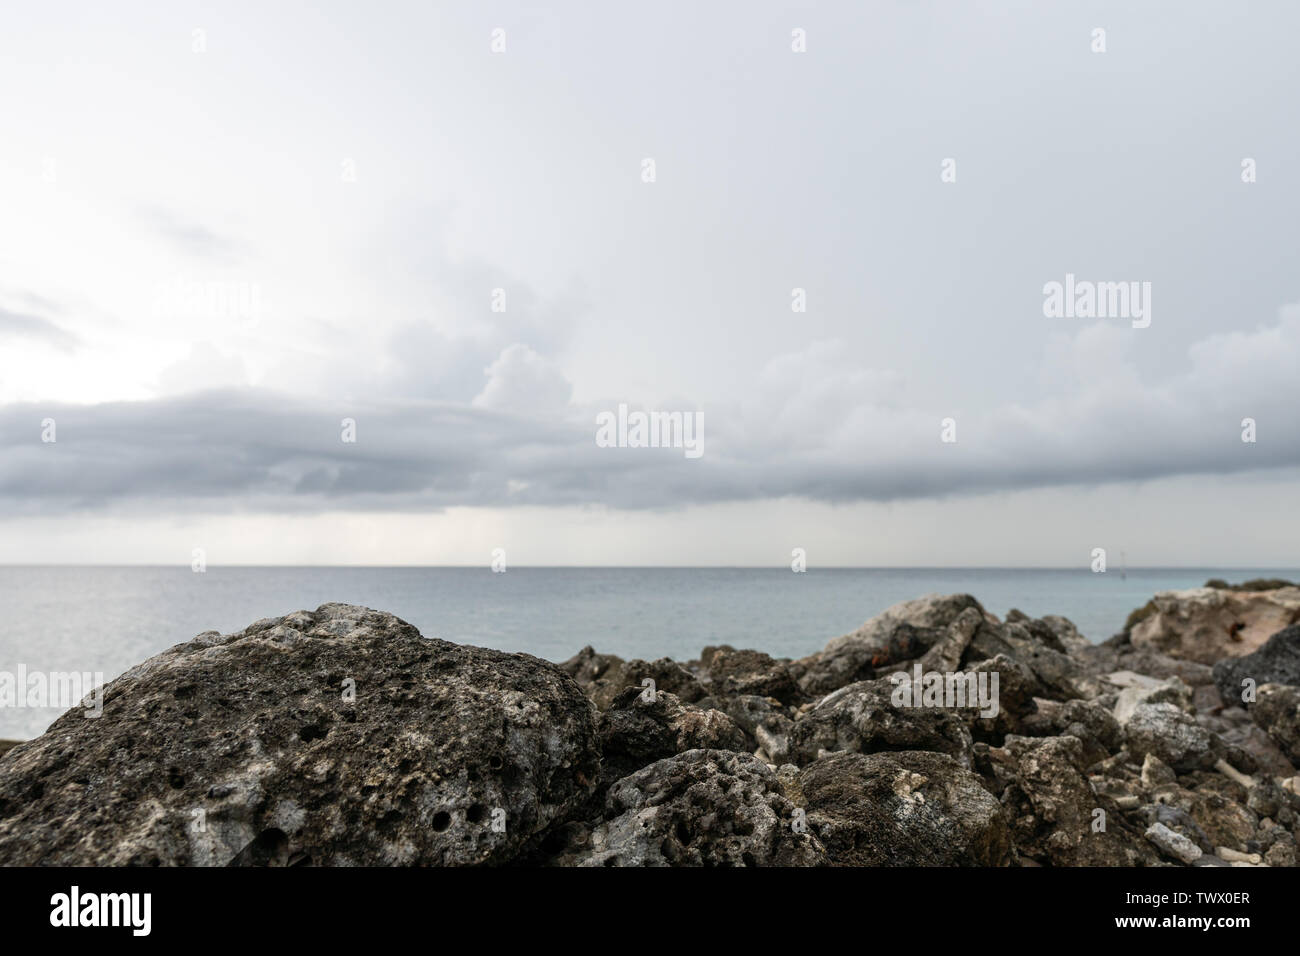 In the foreground in focus is a rocky shore. In the distance, the ocean and clouds Stock Photo